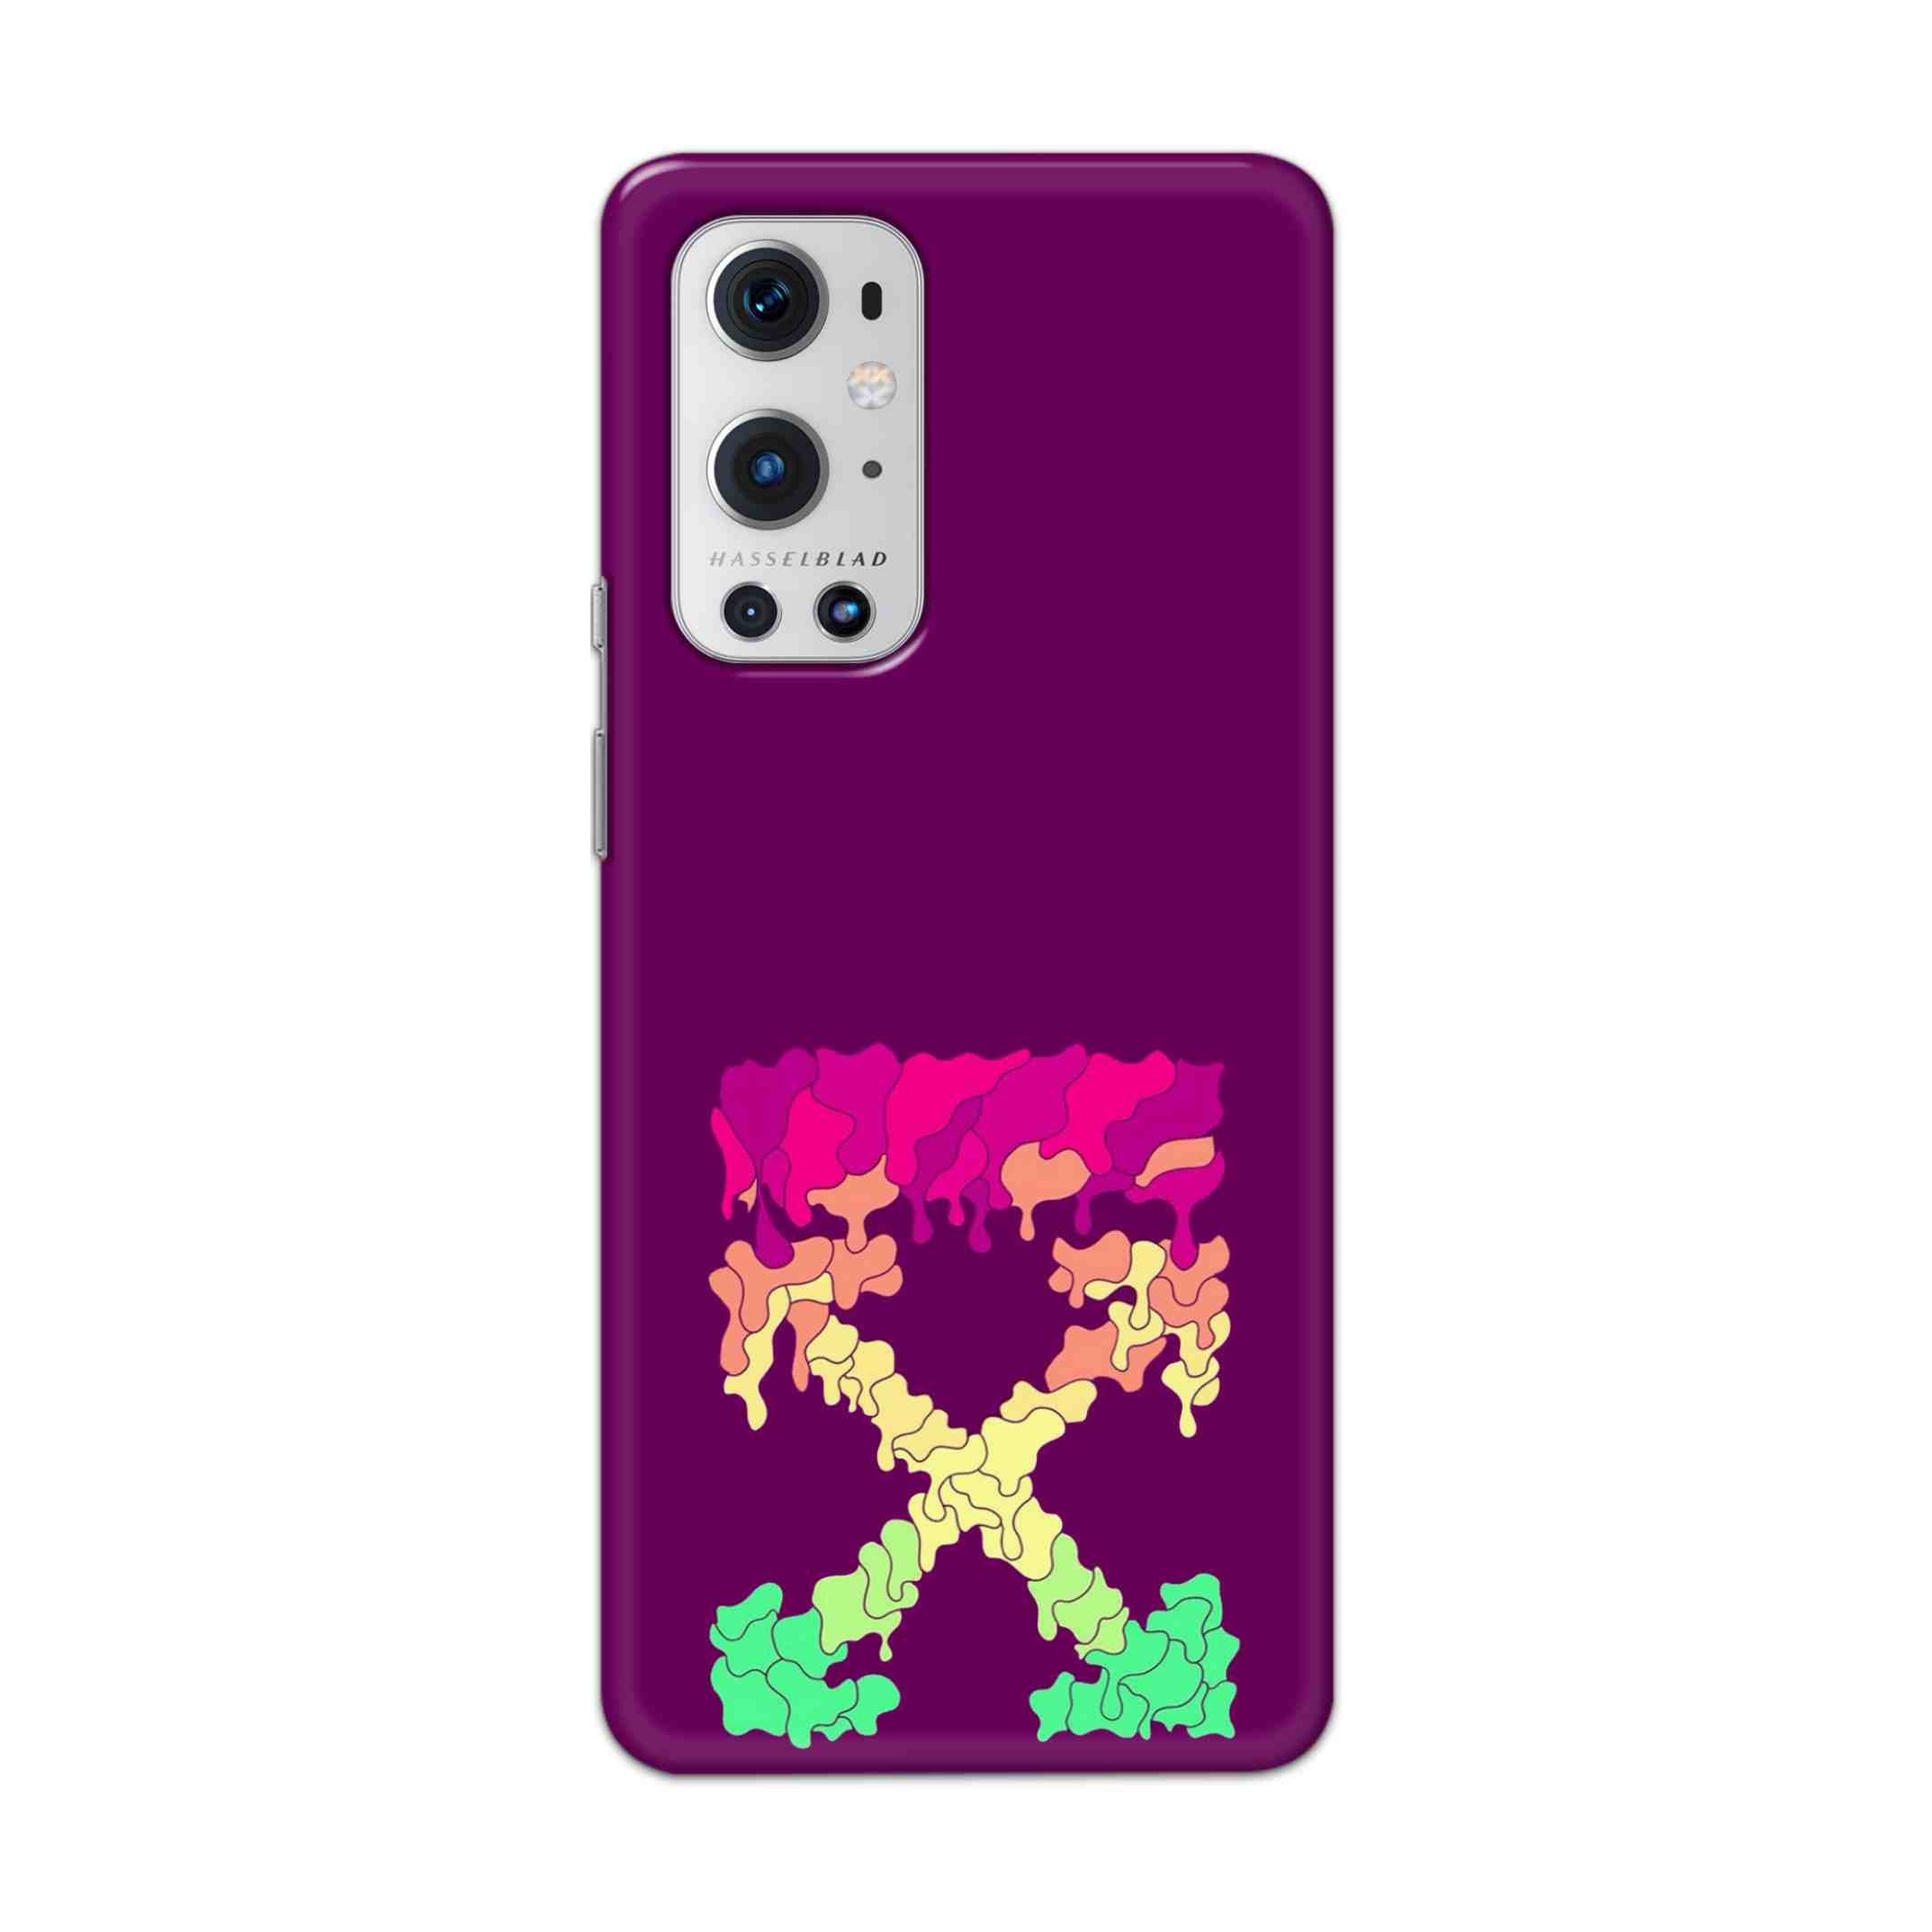 Buy X.O Hard Back Mobile Phone Case Cover For OnePlus 9 Pro Online